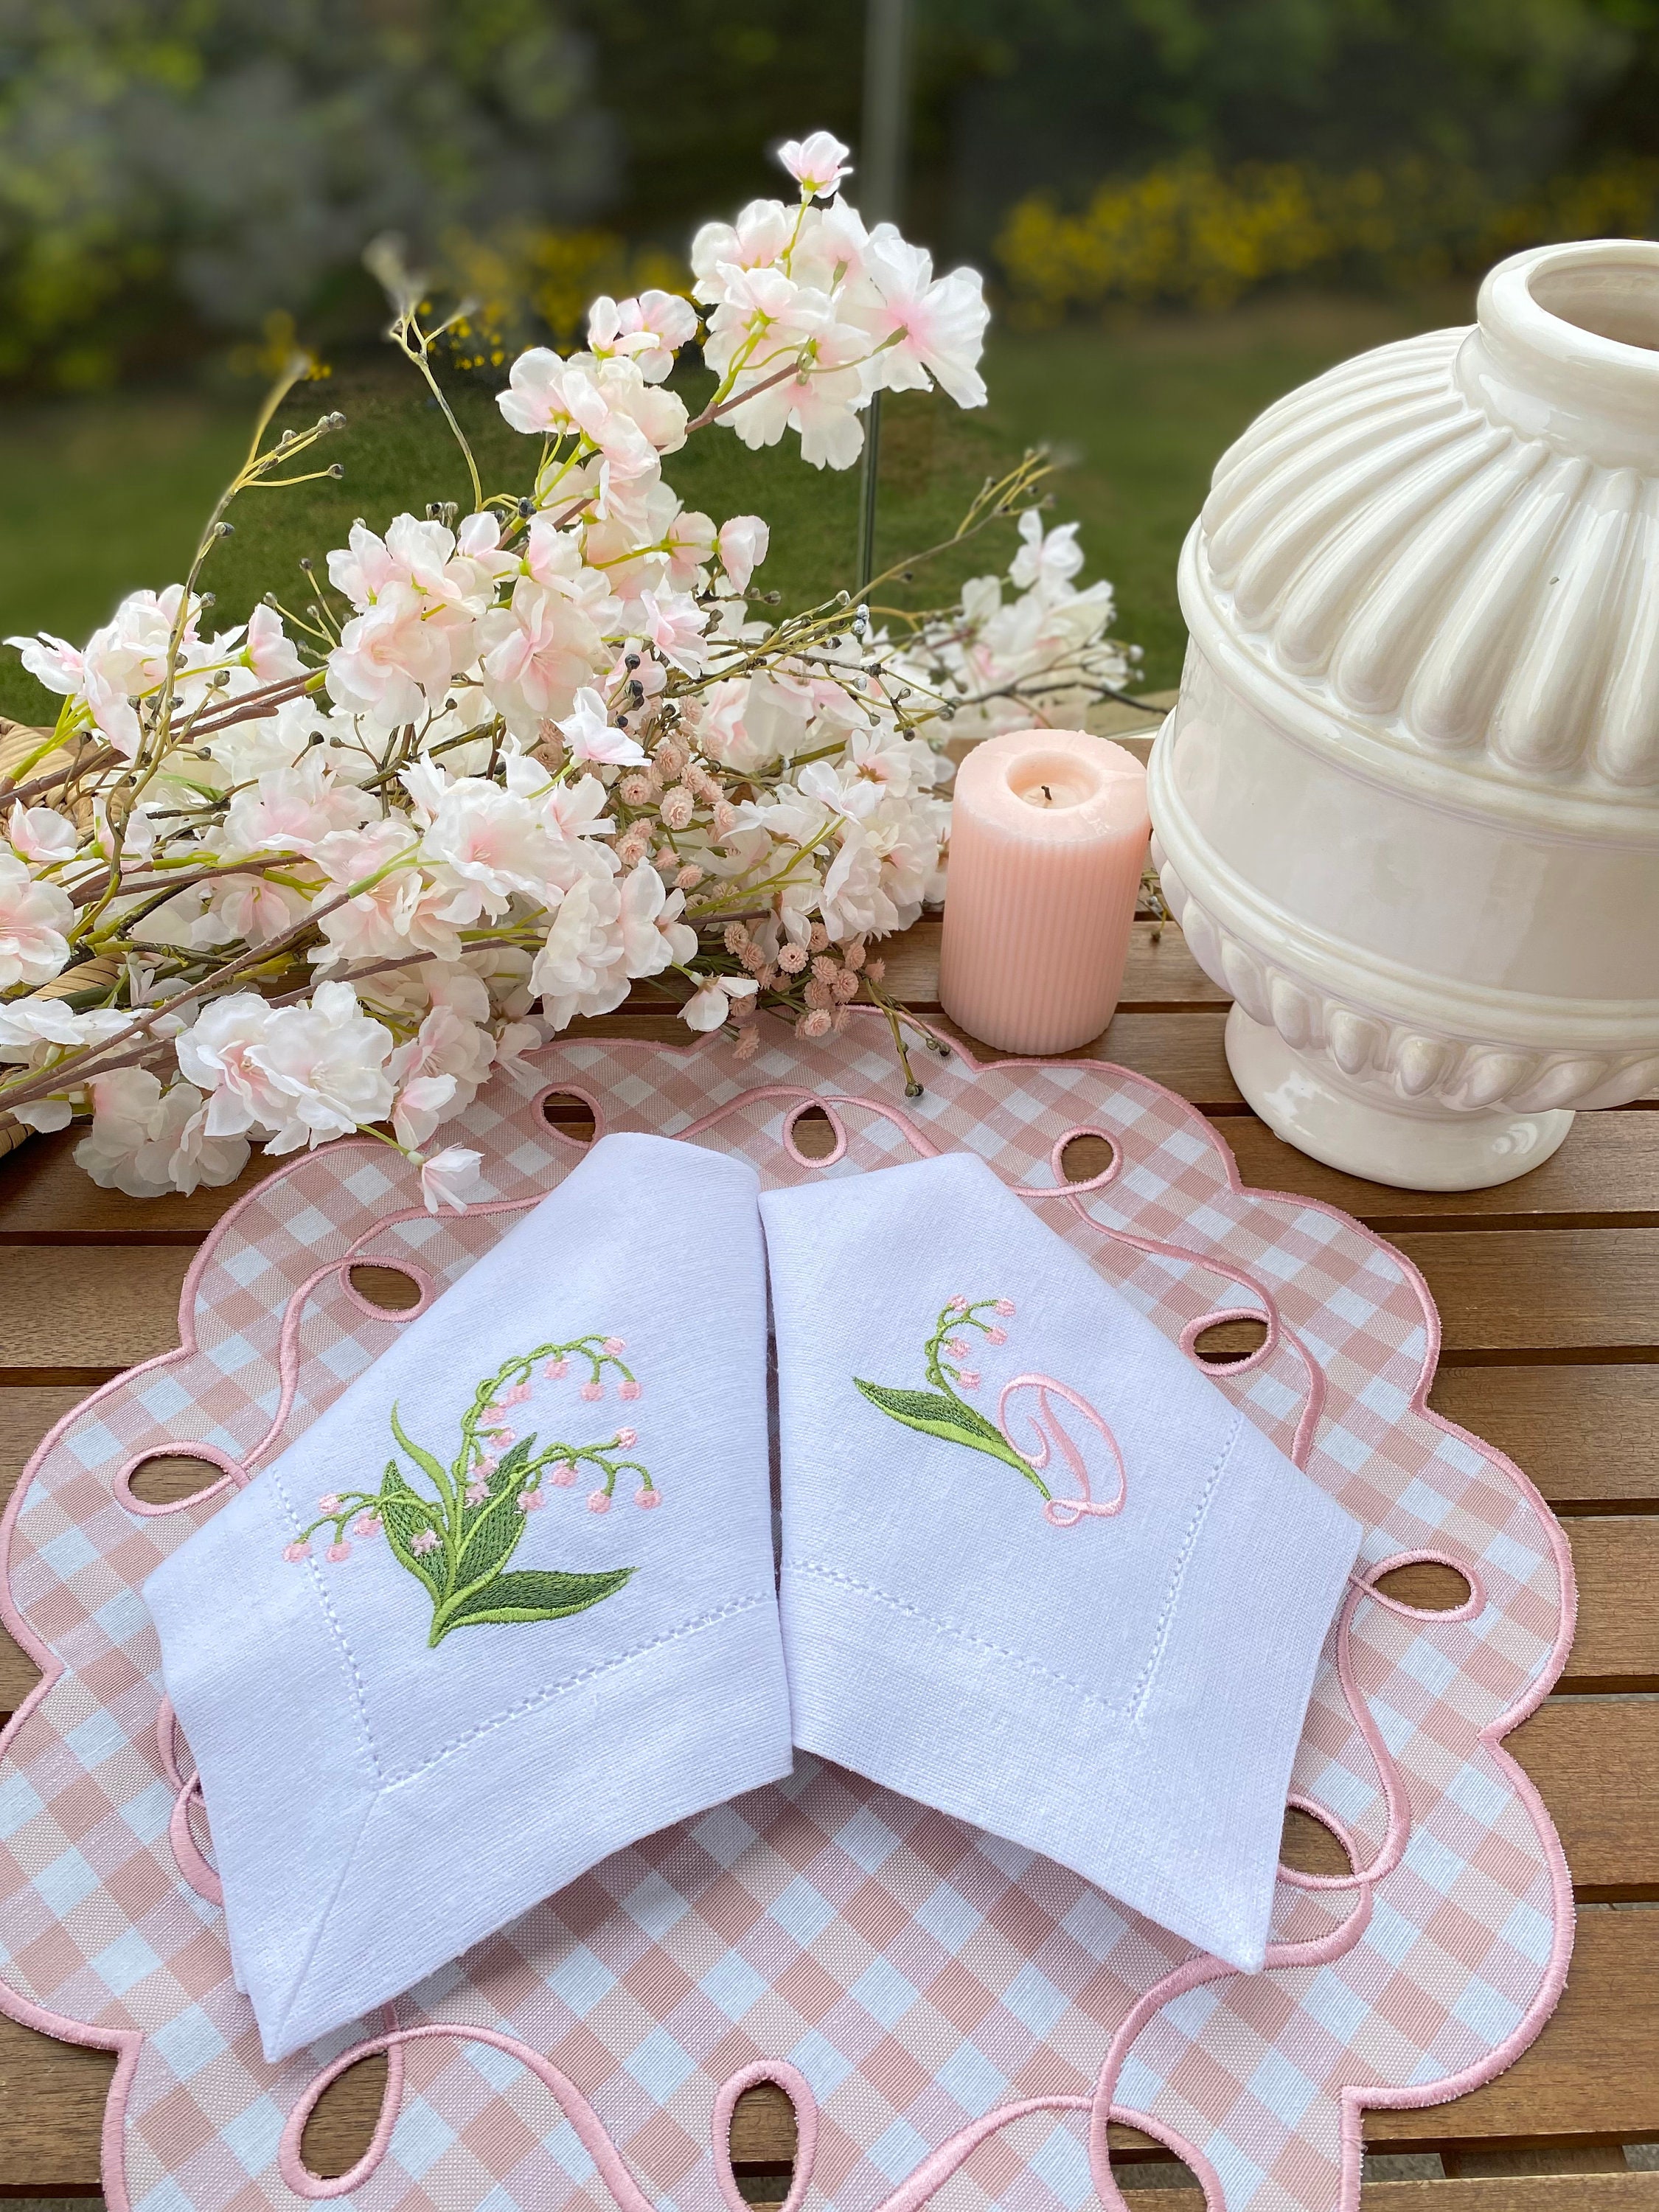 Lily of the Valley Monogrammed Linen Napkin - Bella Lino Linens